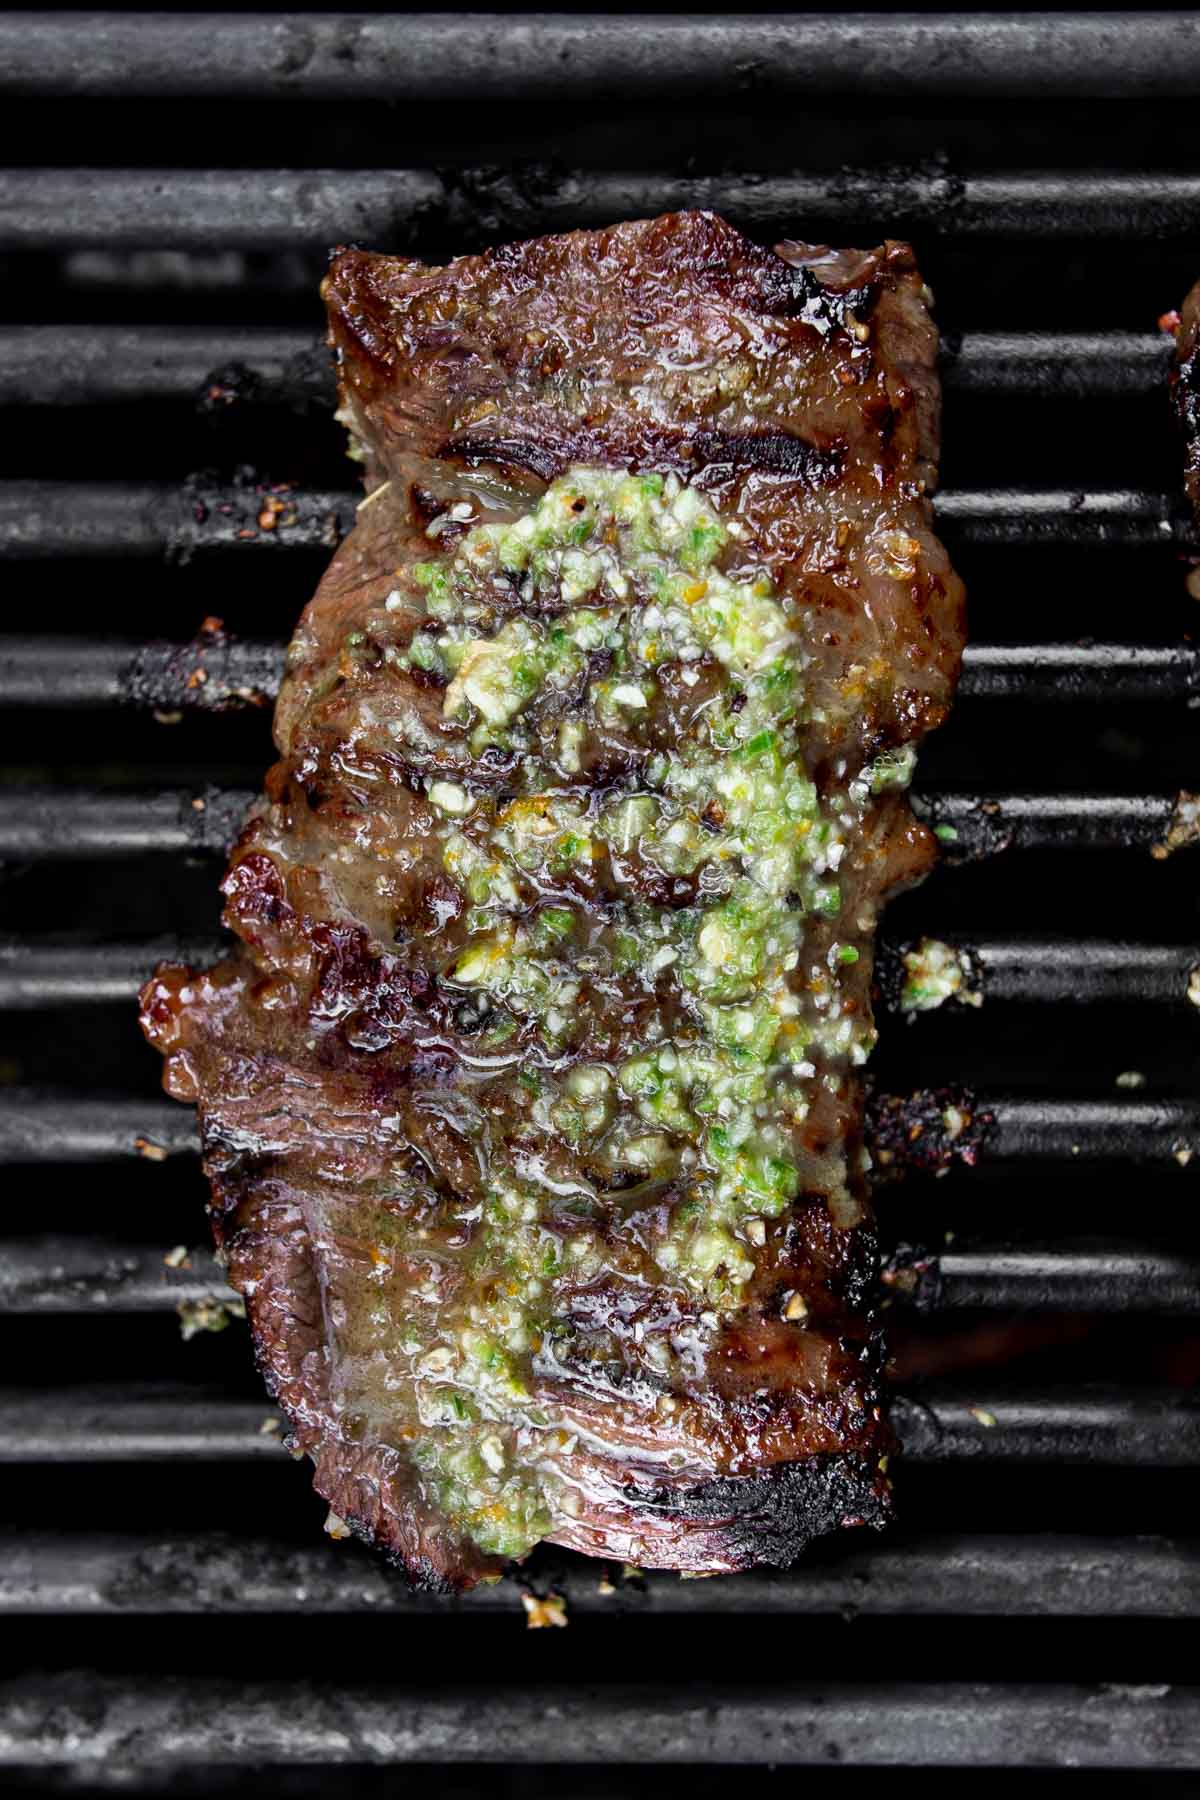 skirt steak on barbecue with carne asada marinade on top.